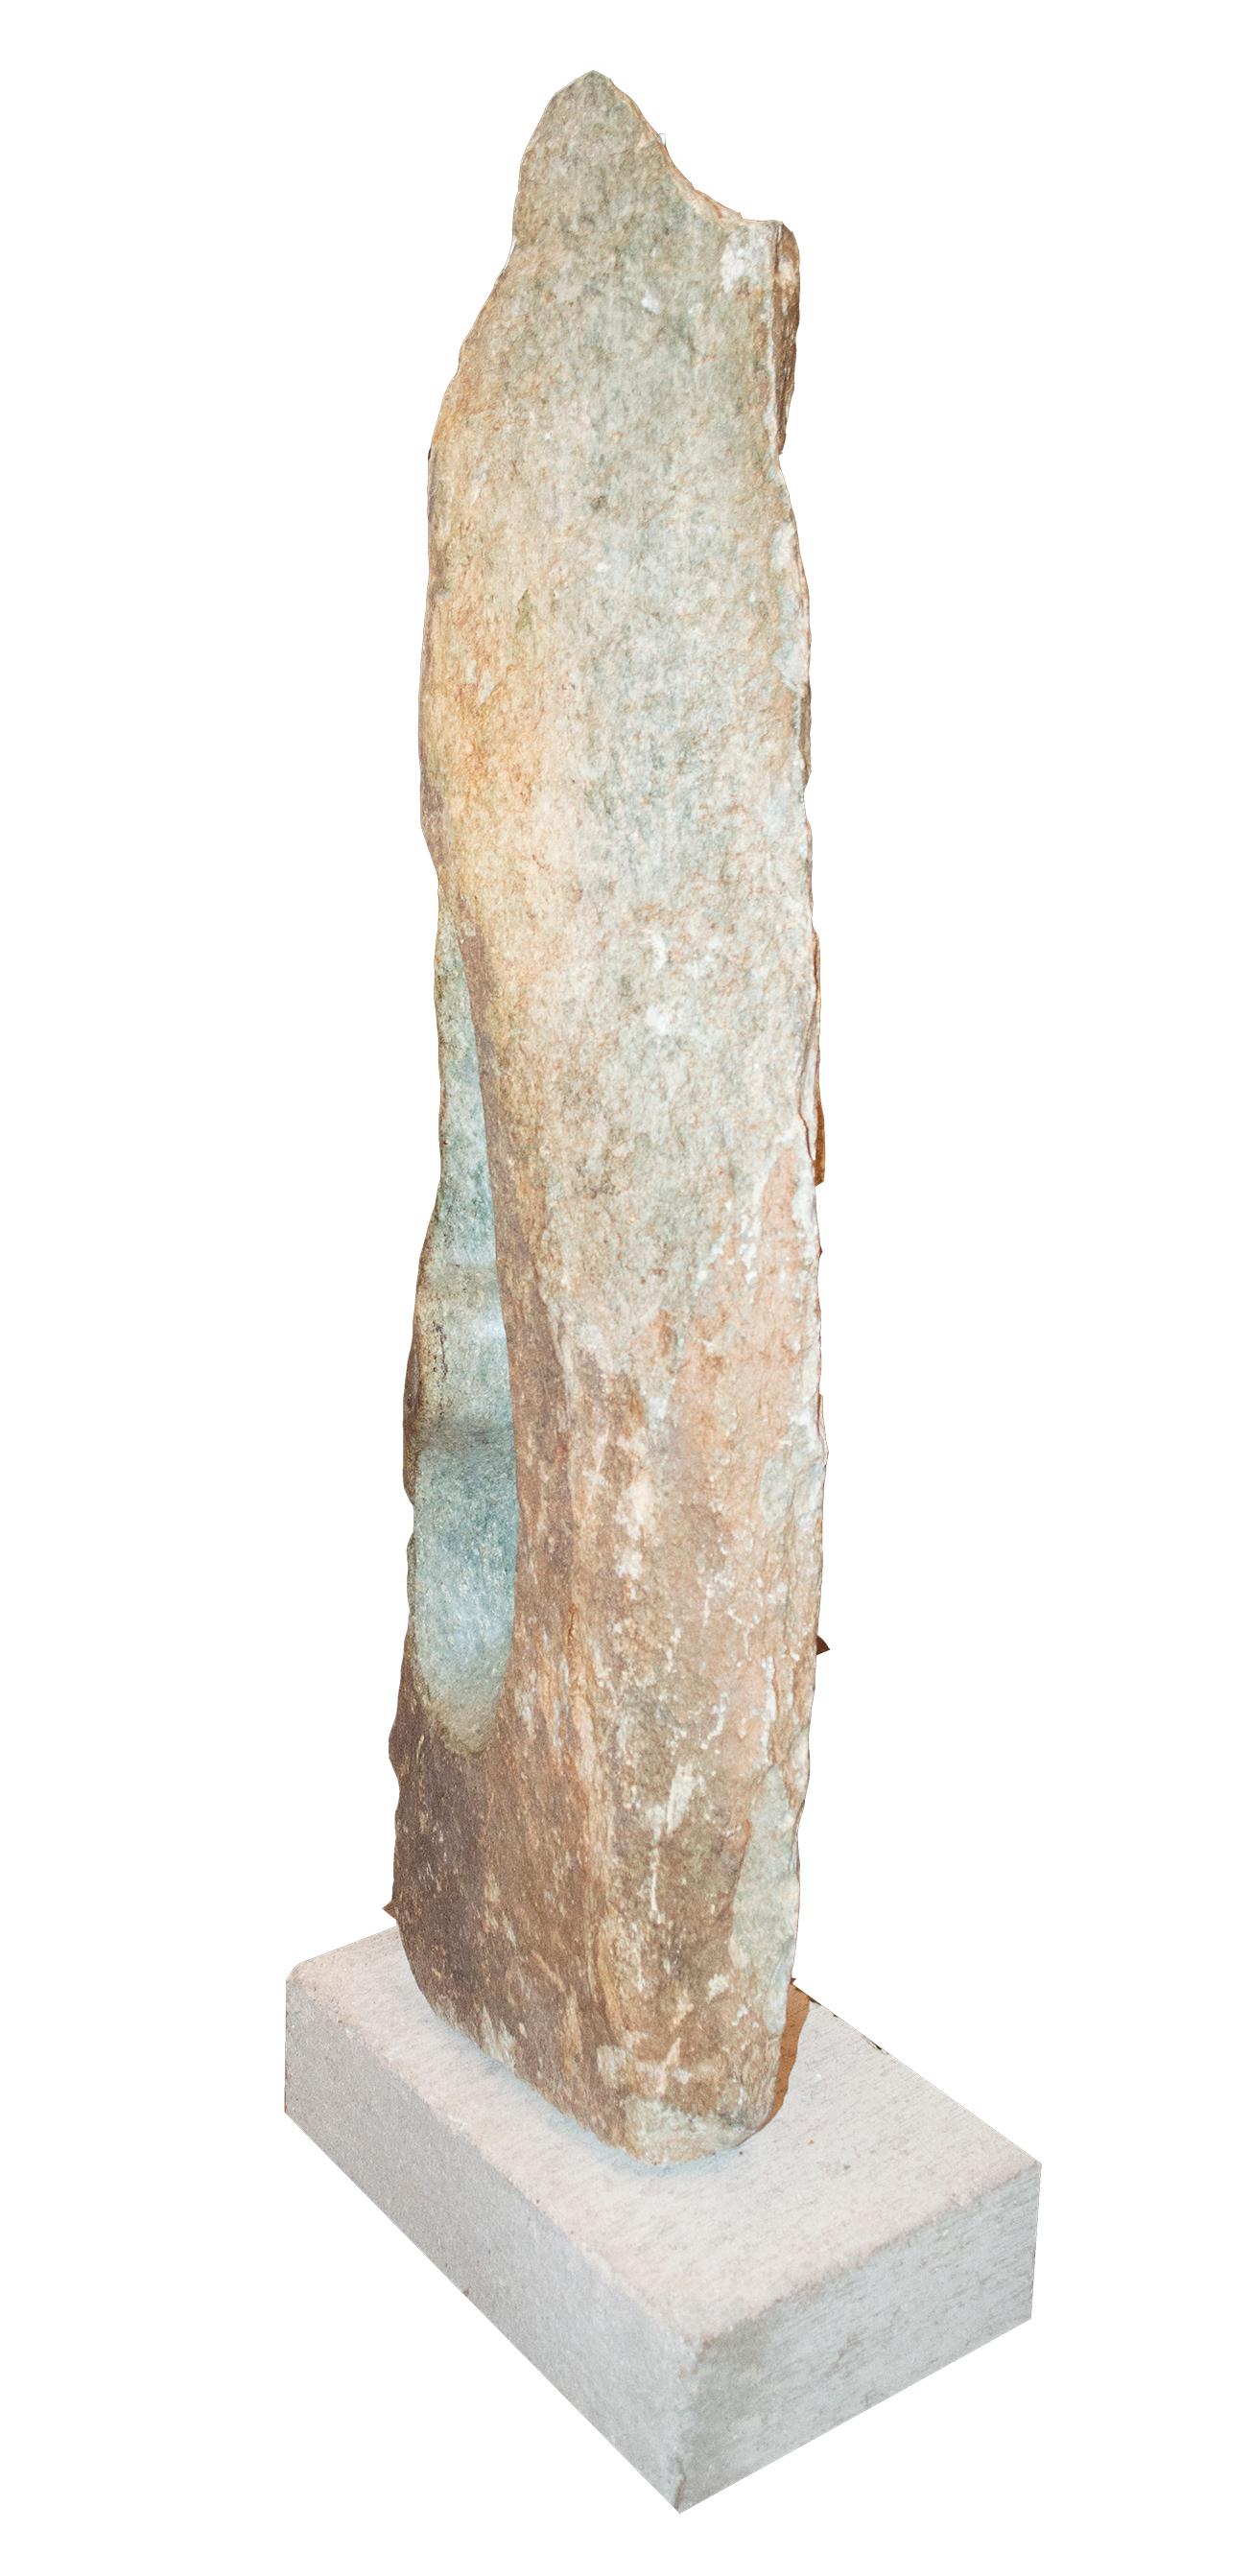 'Scratching Bird' is an original opal serpentine stone sculpture signed by the contemporary Zimbabwean artist Chenjerai Chiripanyanga. The artist presents in this sculpture a highly abstracted figure of a bird, the long beak and eye of which emerges